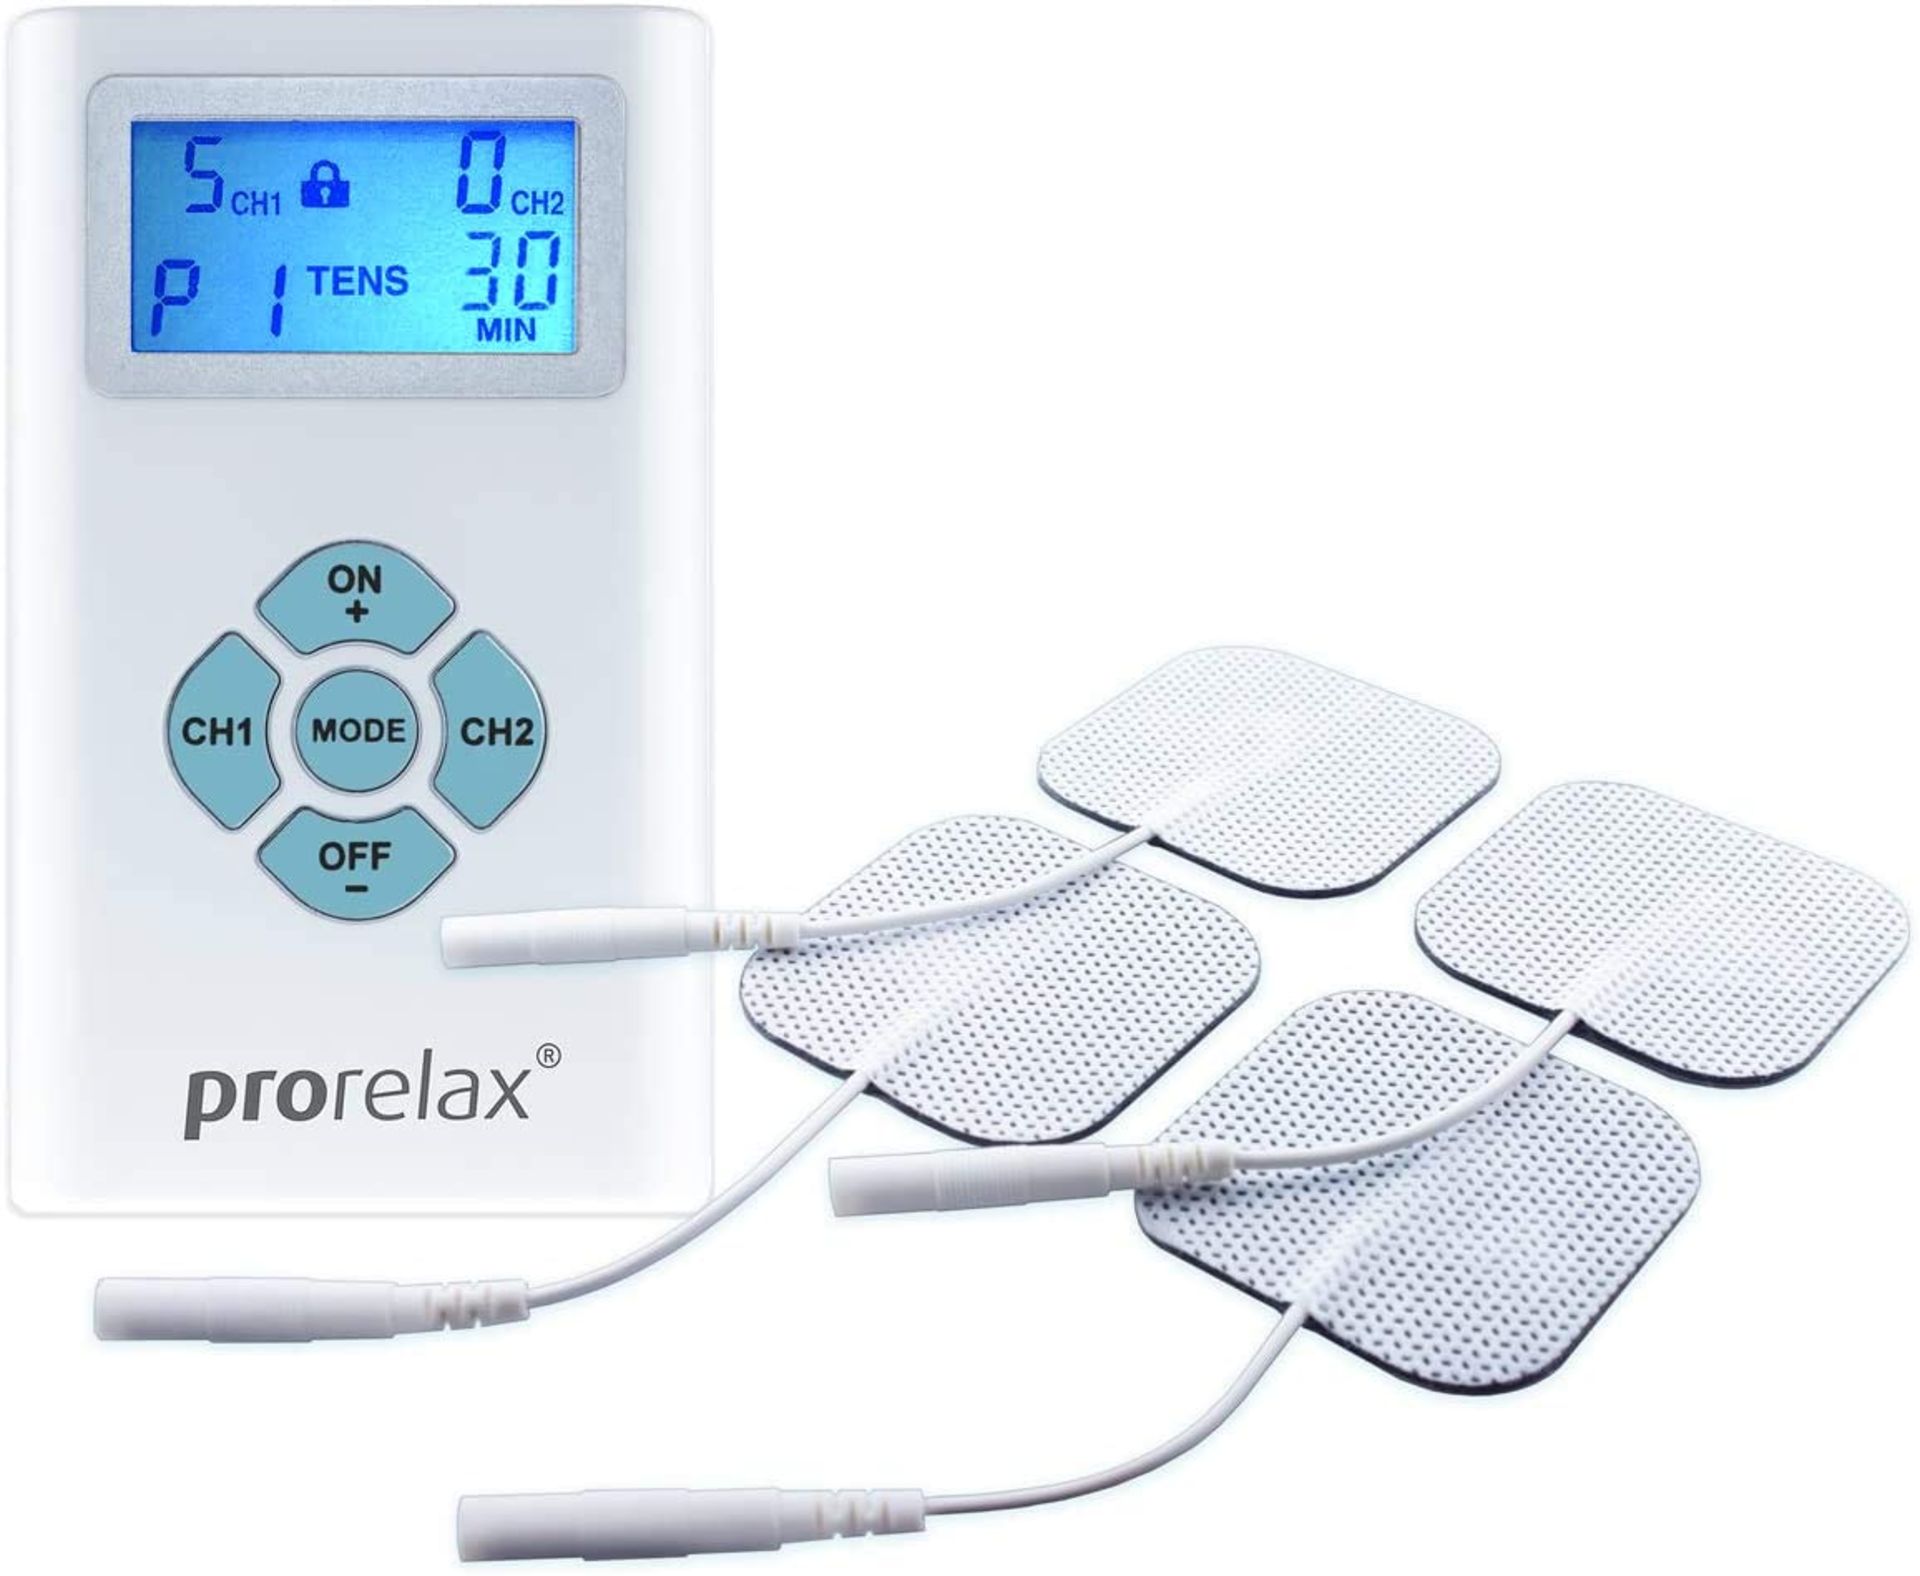 prorelax EMS & TENS machine DUO | 2-in-1 device for natural pain relief and muscle stimulation | for